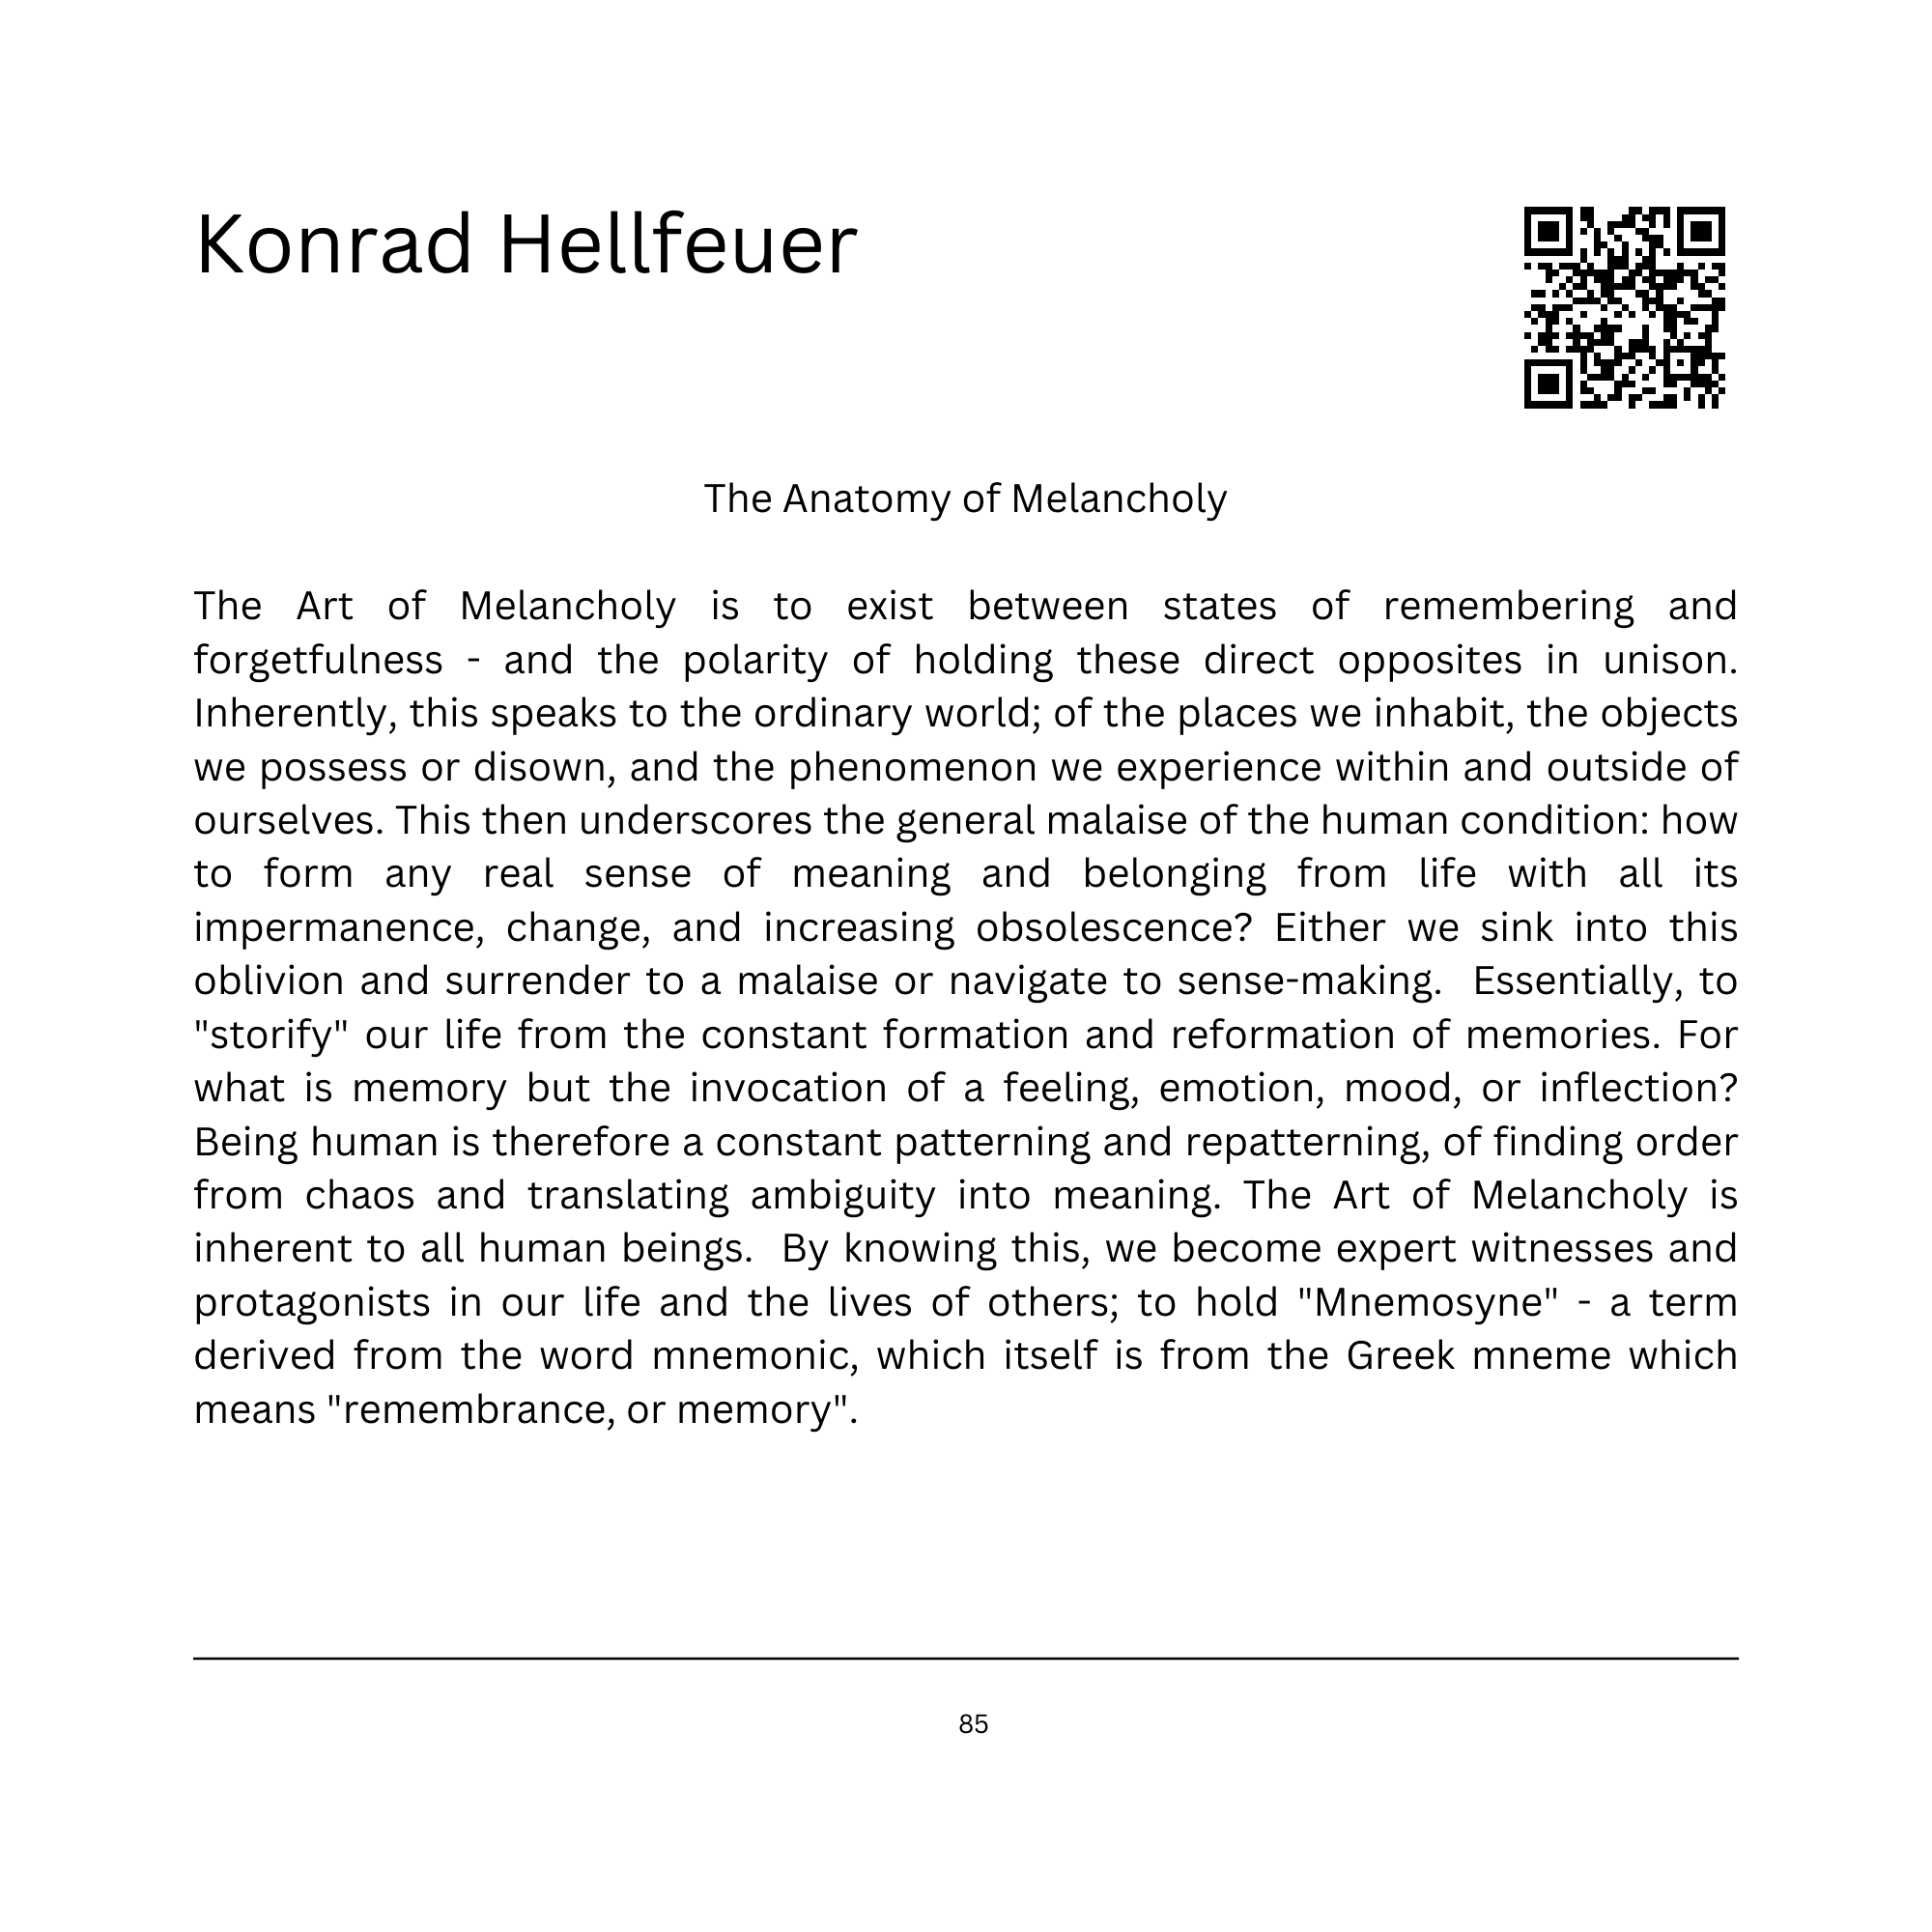 101 Contemporary Artists - HEYDT-84.png